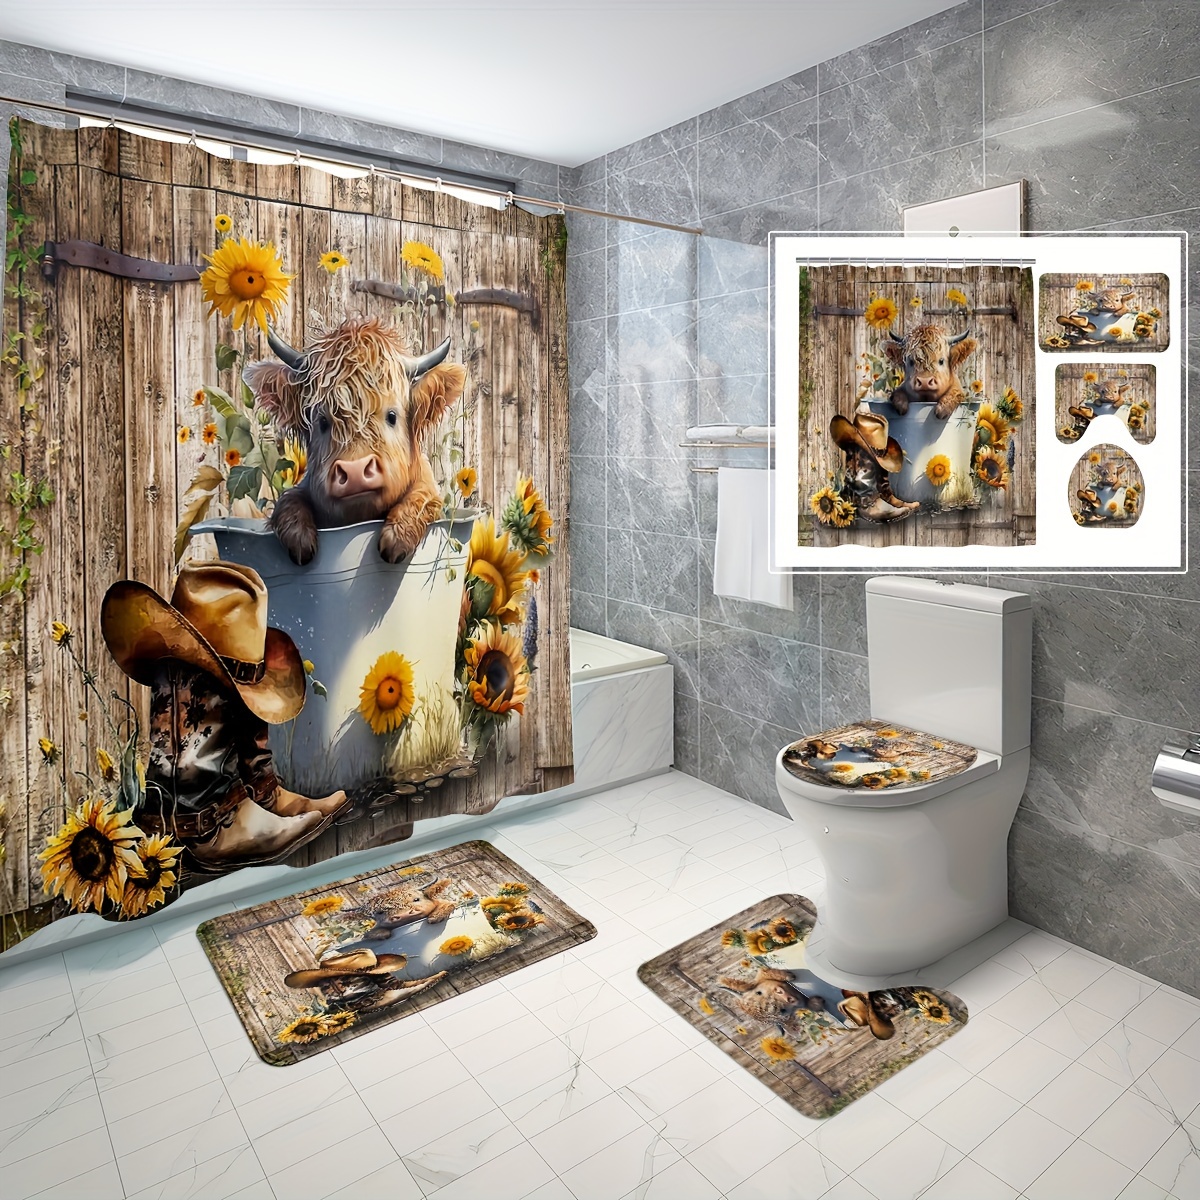 

4-piece Rustic Farmhouse Bathroom Set: Waterproof Shower Curtain With Cow & Barn Door Design, Non-slip Rug, Toilet Lid Cover, And U-shaped Mat - Machine Washable Polyester